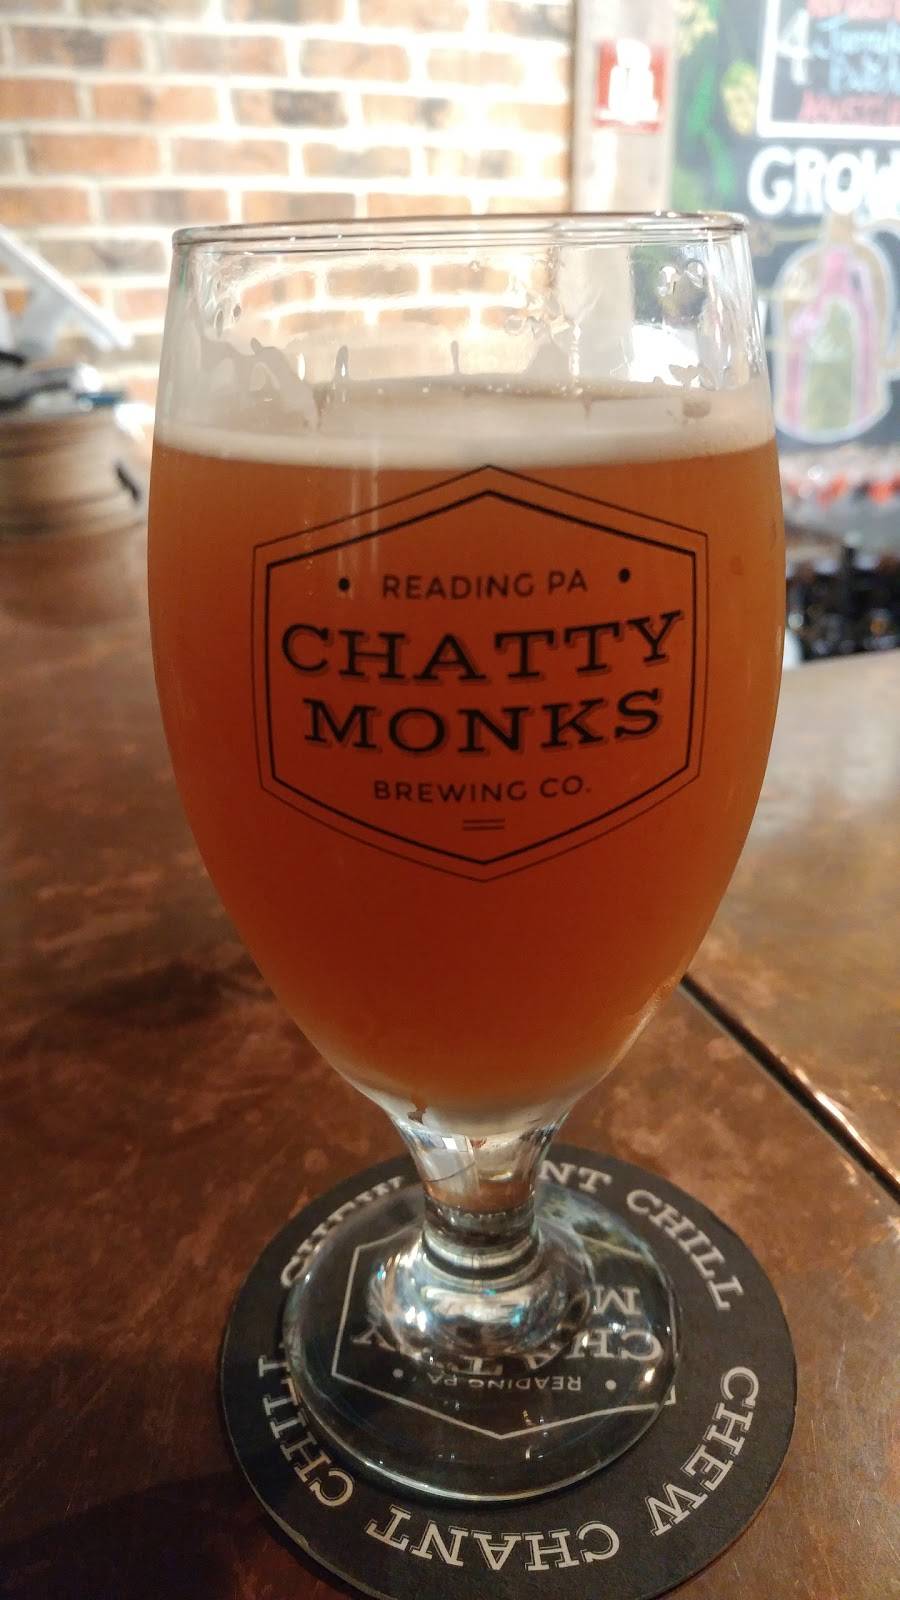 Chatty Monks Brewing Company | restaurant | 610 Penn Ave, West Reading, PA 19611, USA | 4848180176 OR +1 484-818-0176